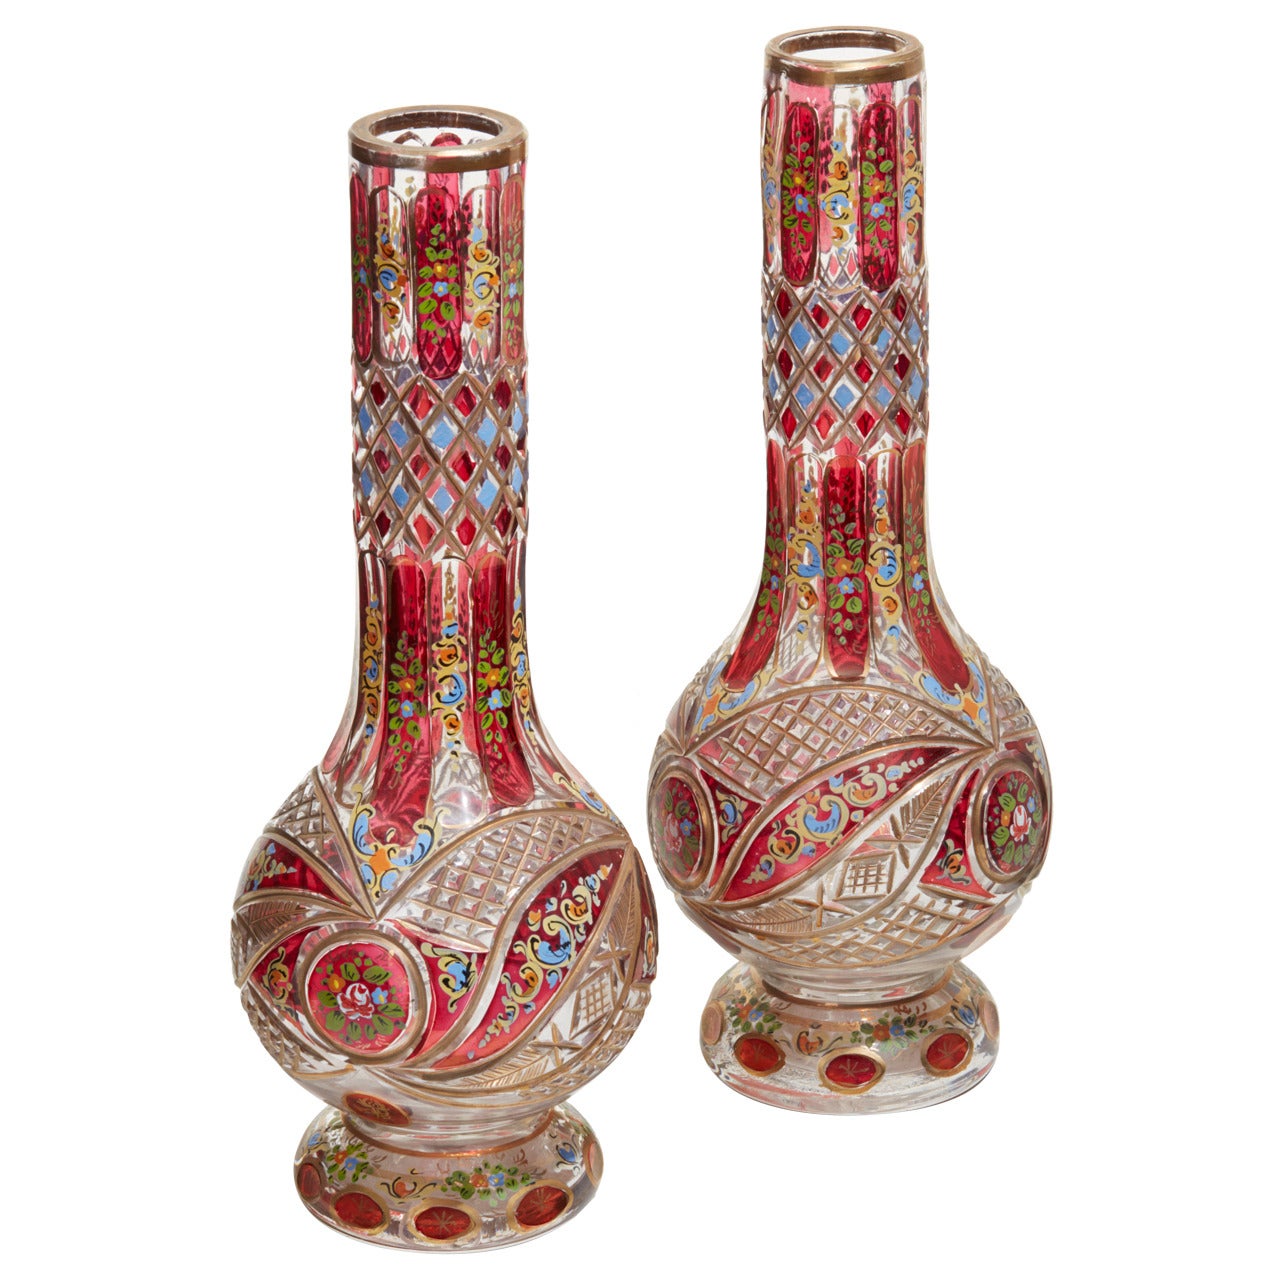 Pair of Bohemian Enameled Glass Vases, Late 19th Century